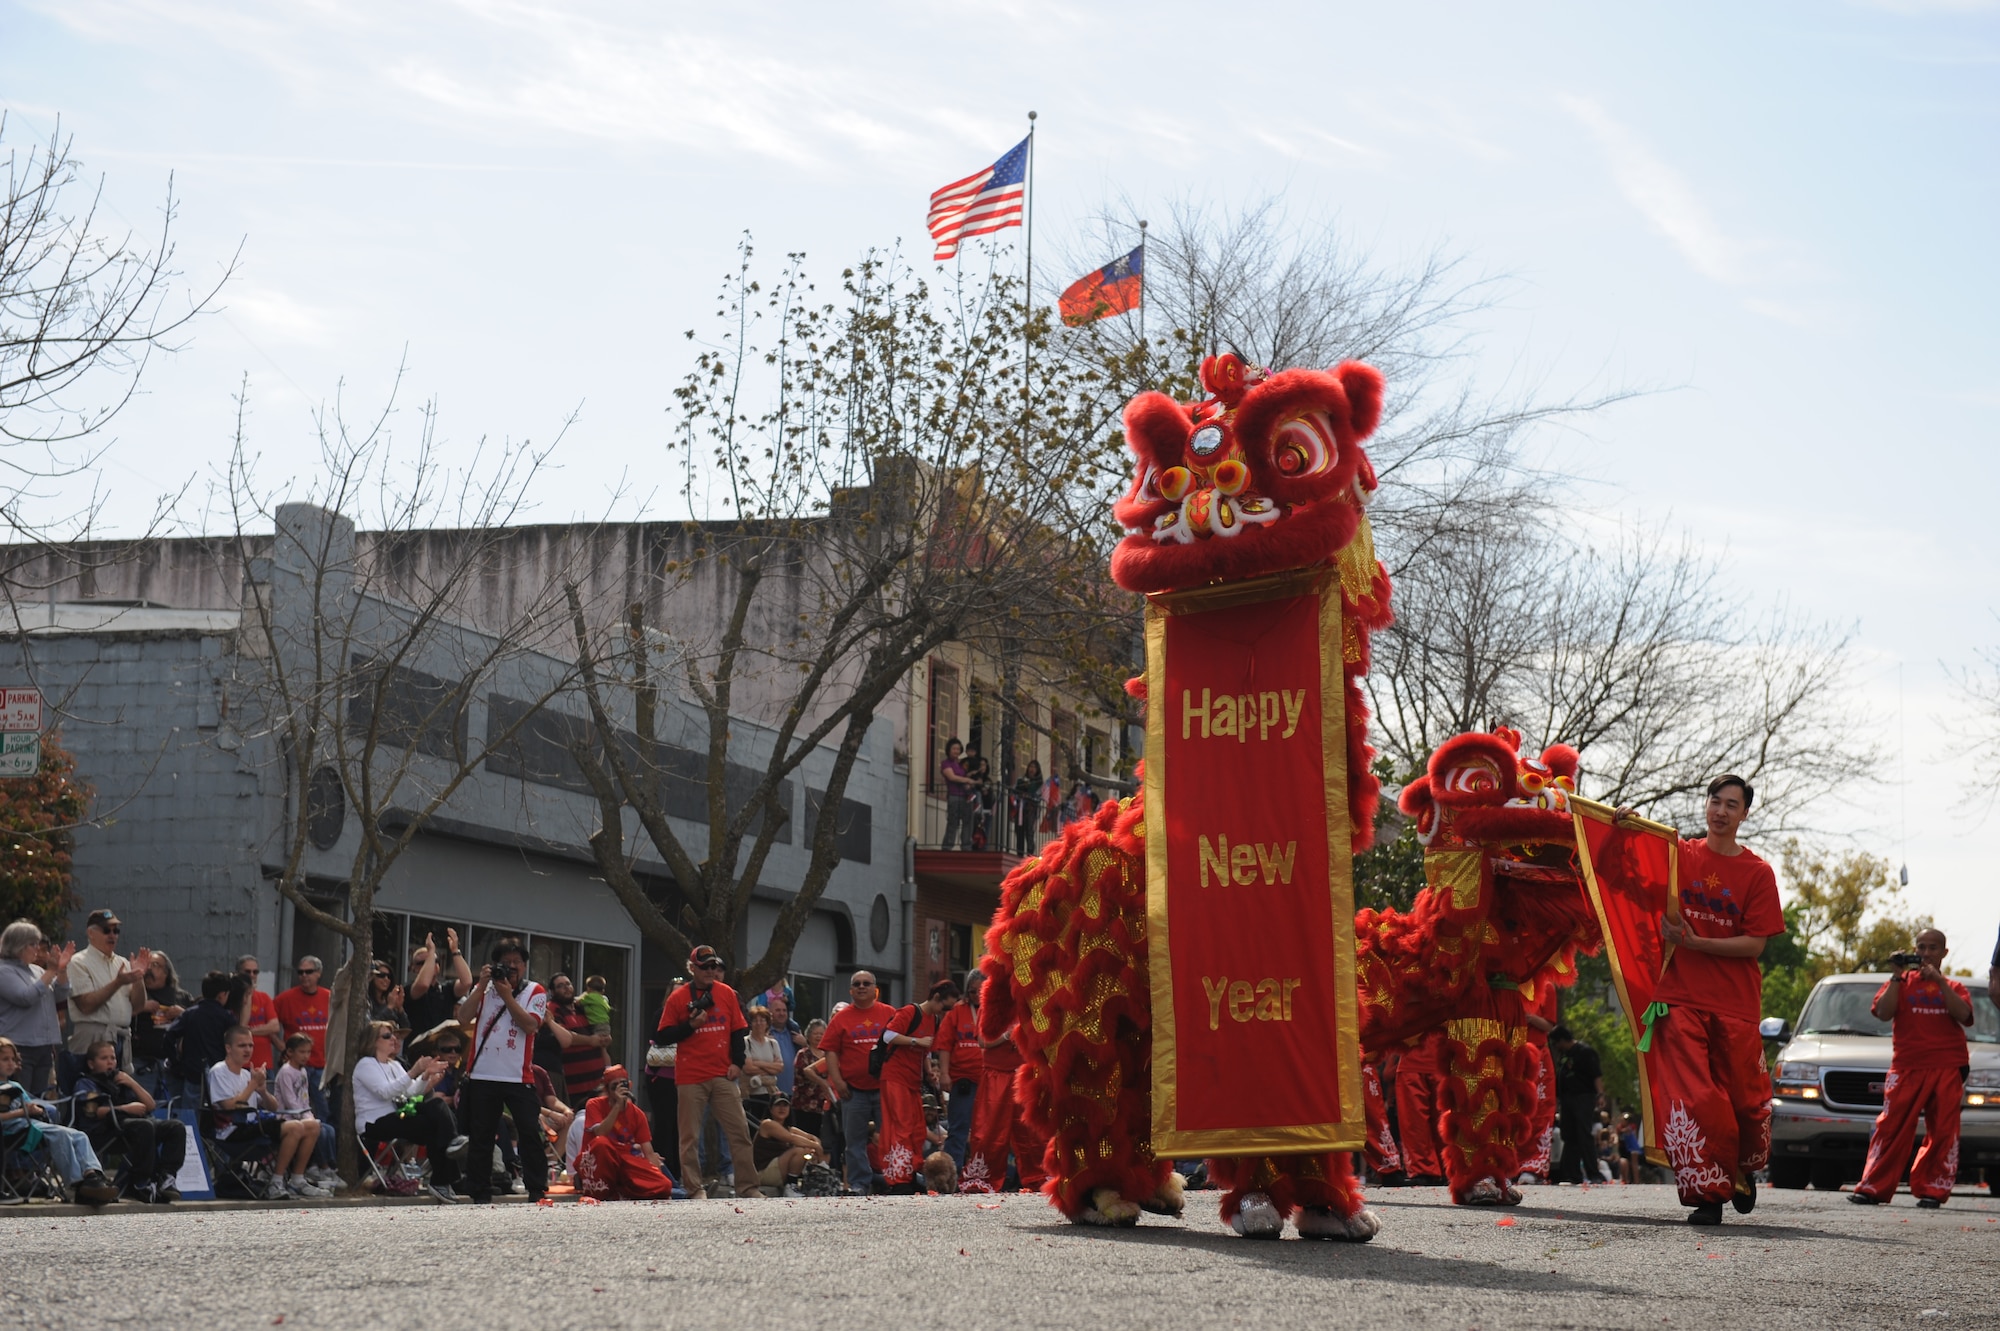 Lion dancers hold up “Happy New Year” banners during the Bok Kai Festival in Marysville, Calif., March 16, 2013. The festival has been held in Marysville for 133 years. (U.S. Air Force photo by Staff Sgt. Robert M. Trujillo/Released)